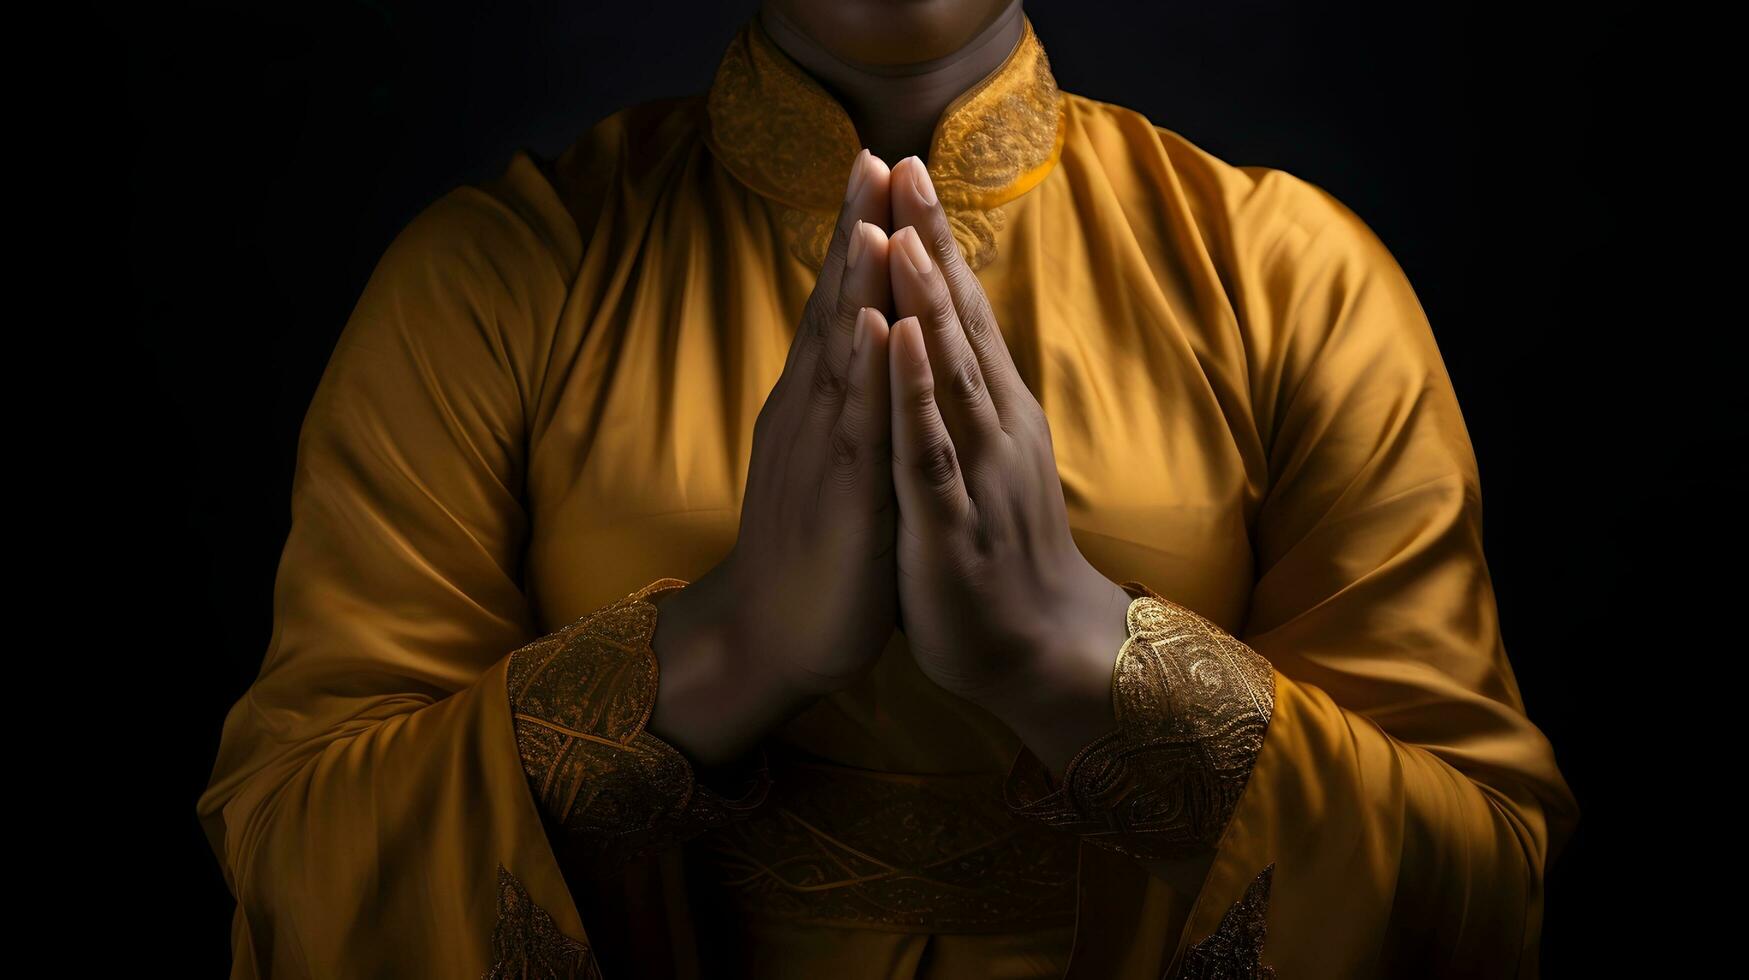 Prayer of Faith, Hands in Yellow Robe with Gold Accents 33887071 Stock ...